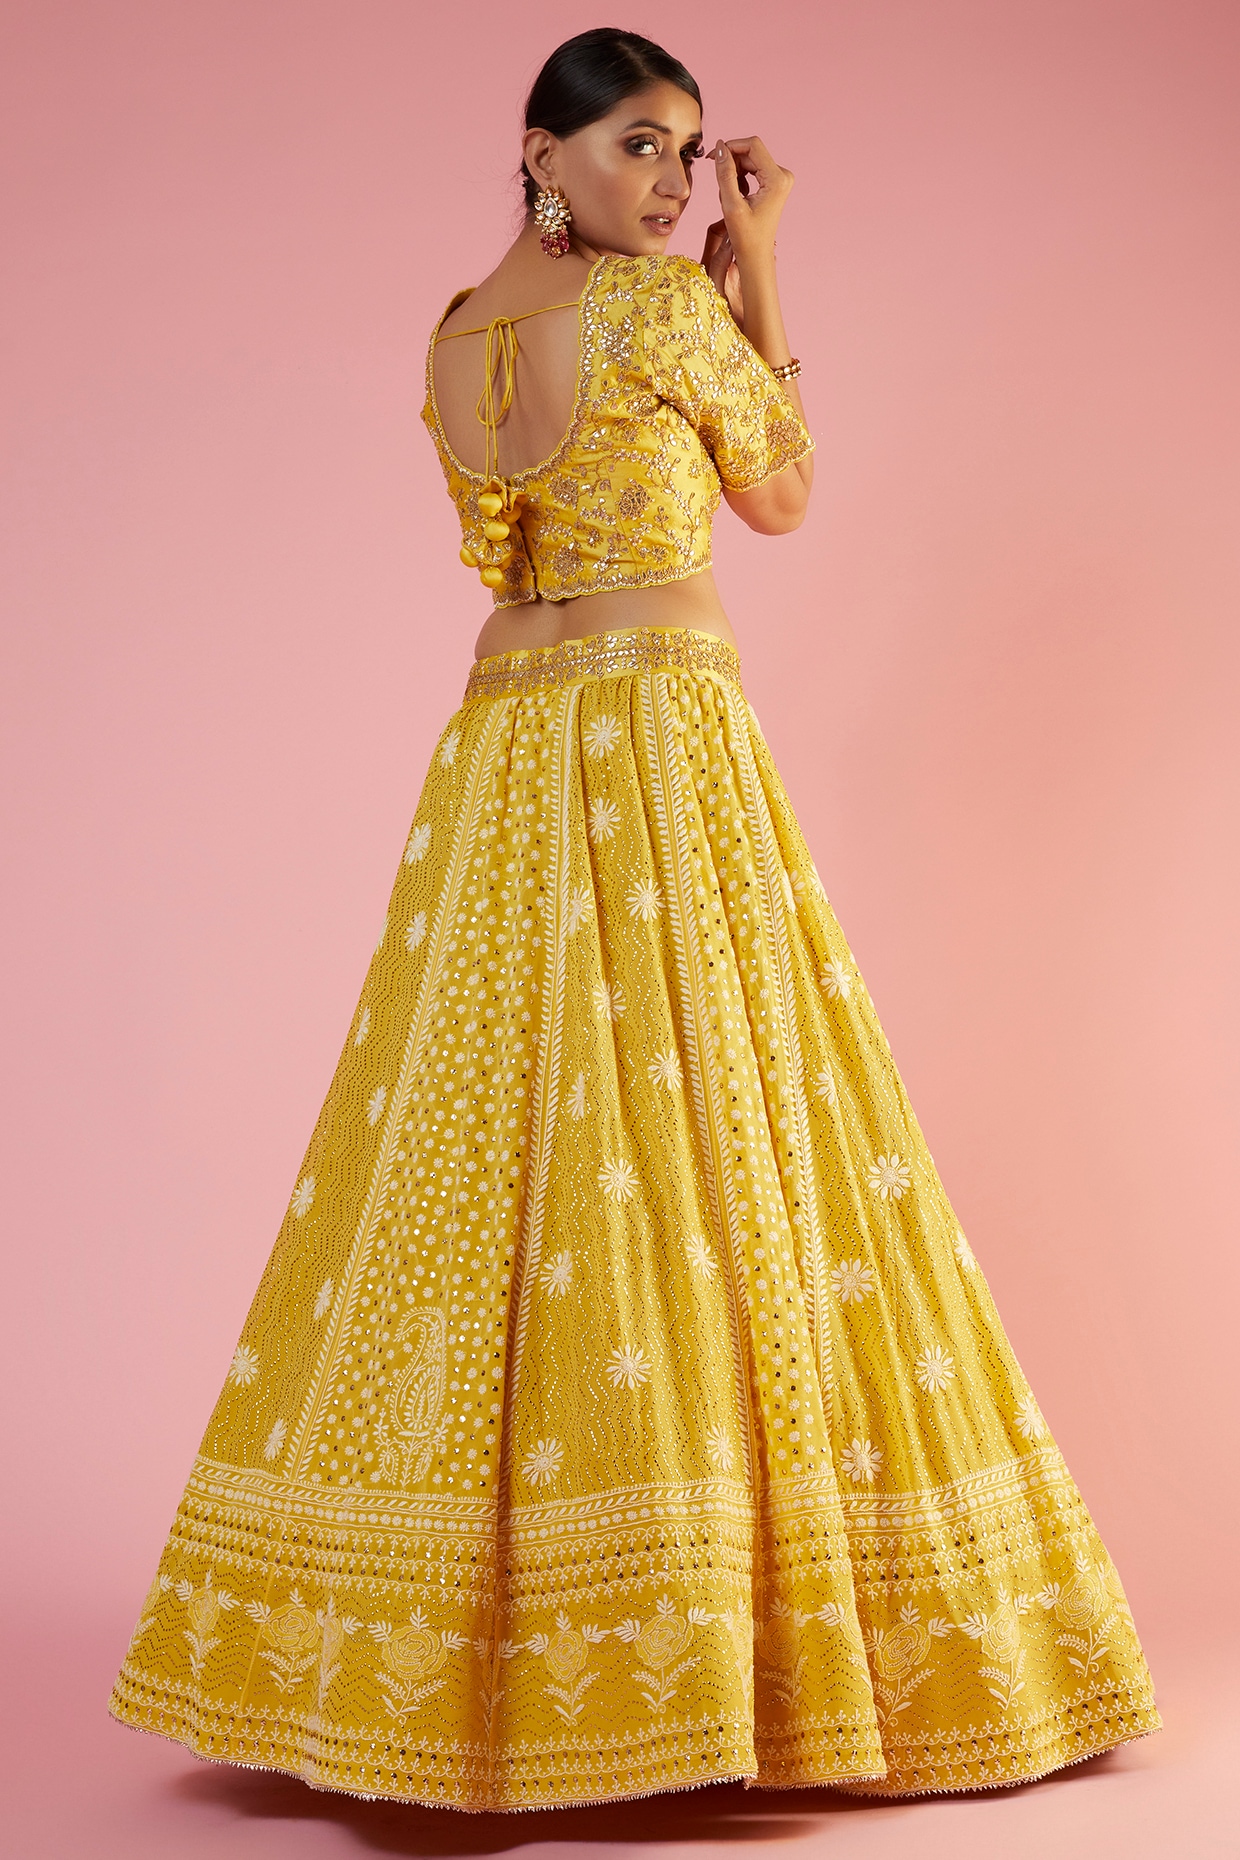 Lowest price | Yellow Casual Weaving Designer Lehenga Choli, Yellow Casual  Weaving Designer Lehengas and Yellow Casual Weaving Ghagra Chaniya Cholis  online shopping | Page 2